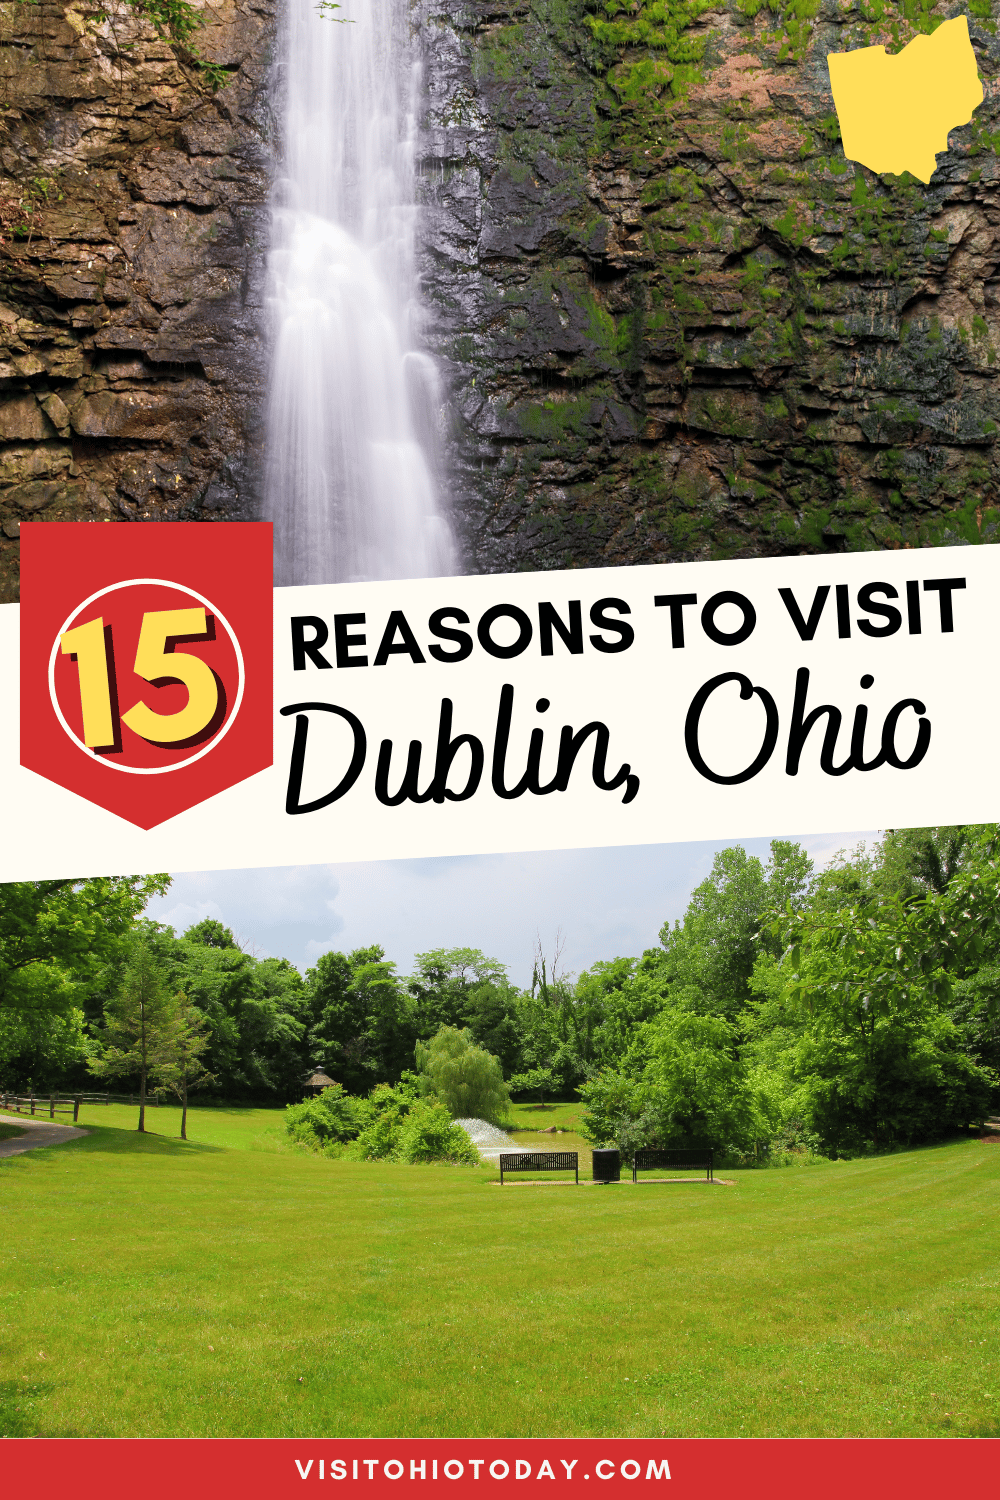 Top half of this image is a photo of a waterfall in Dublin Ohio. Bottom half is a park in Dublin Ohio